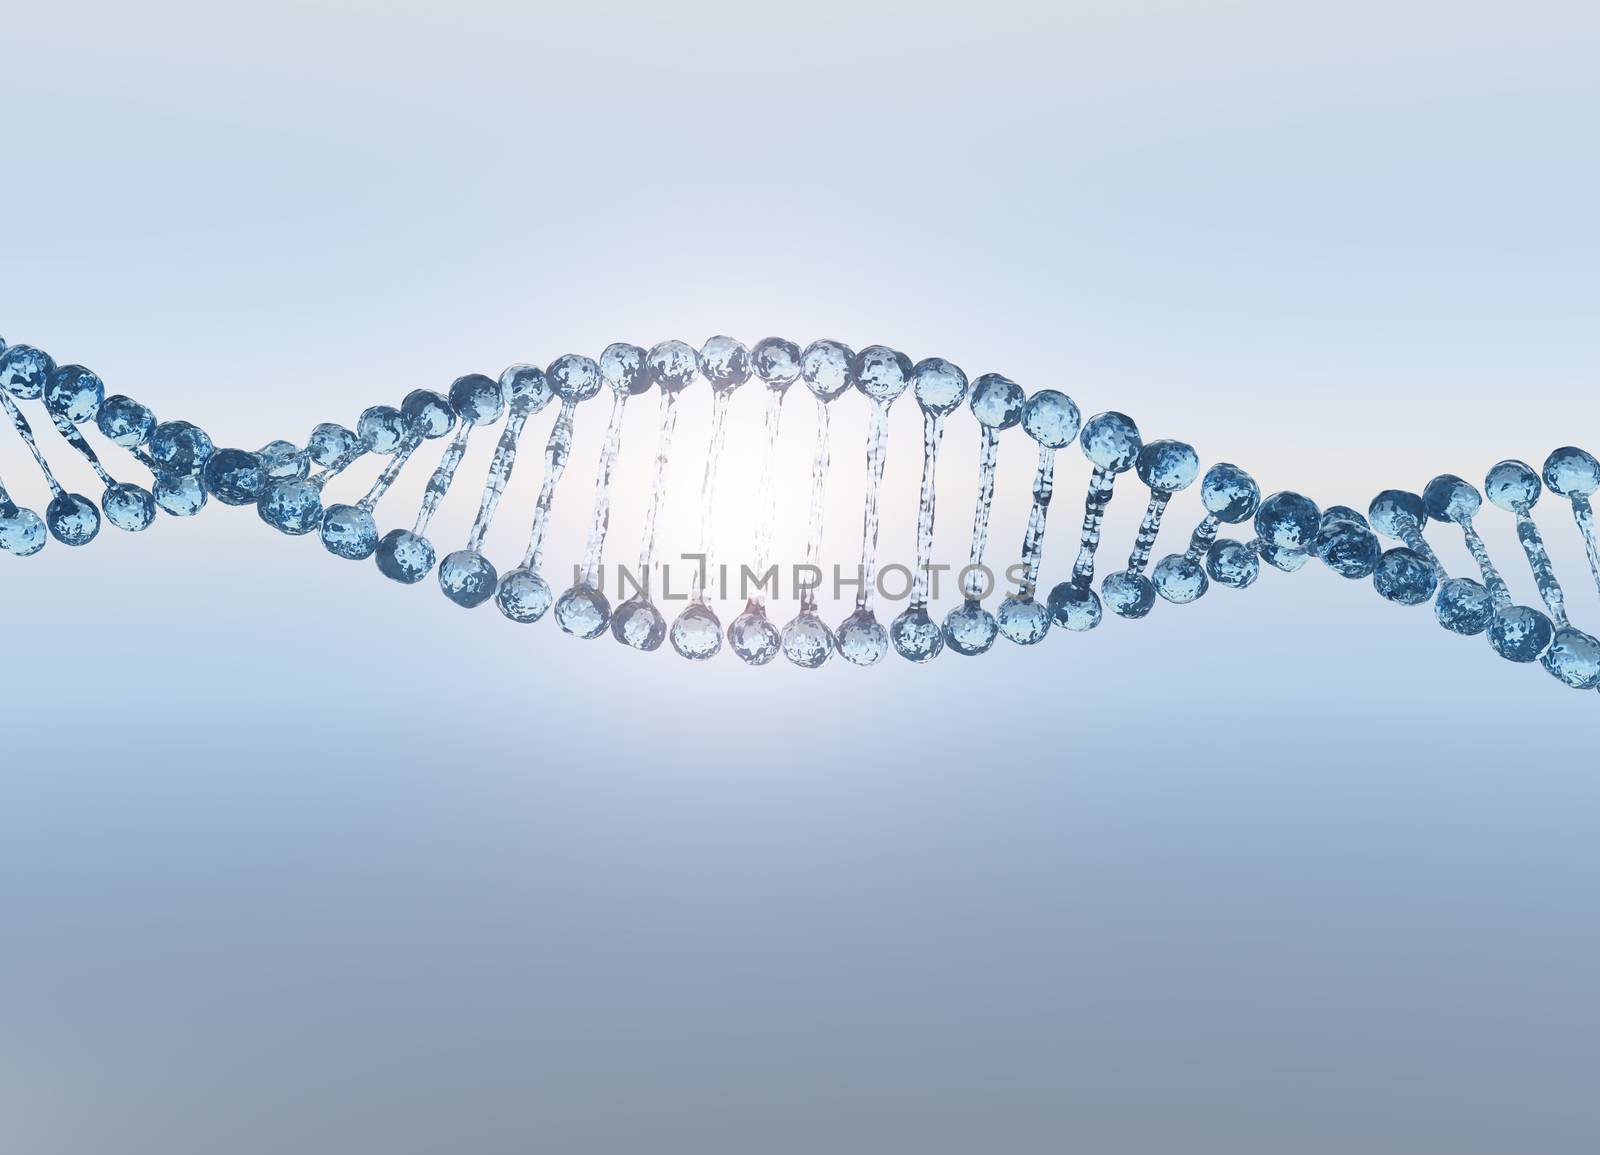 DNA Strand of Water by applesstock